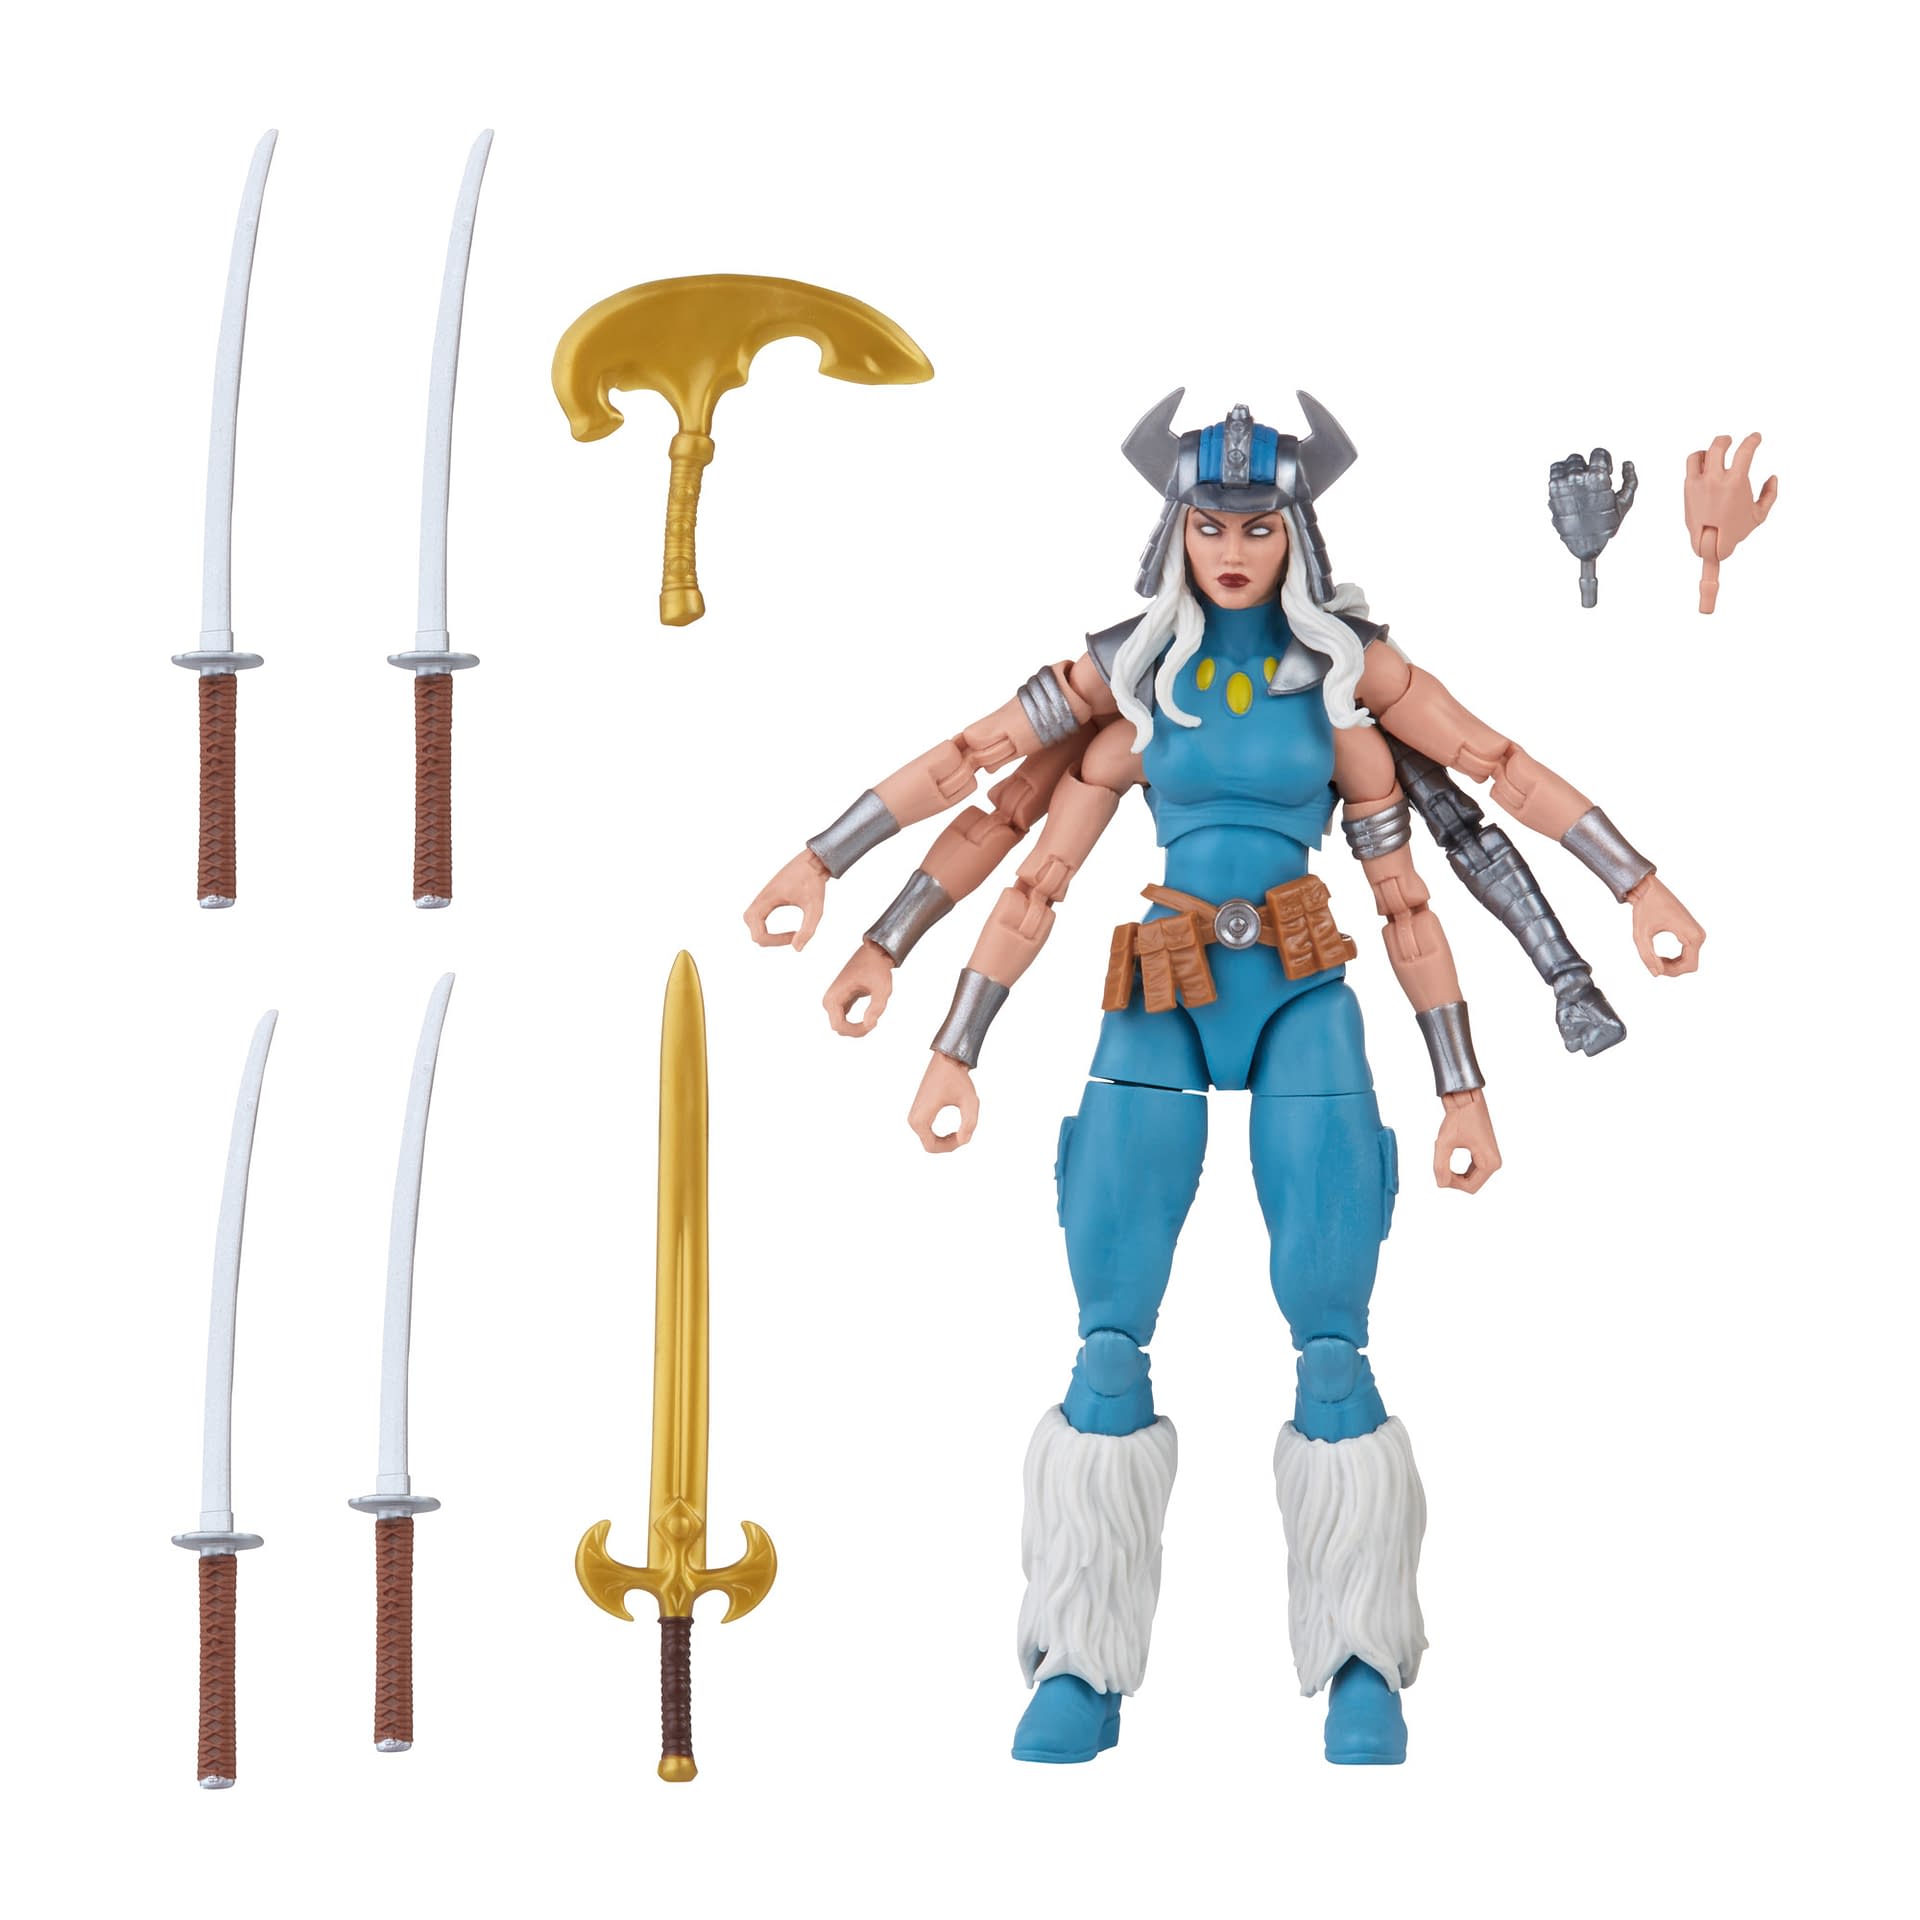 X-Men's Spiral and Her Six Arms Arrive with Marvel Legends